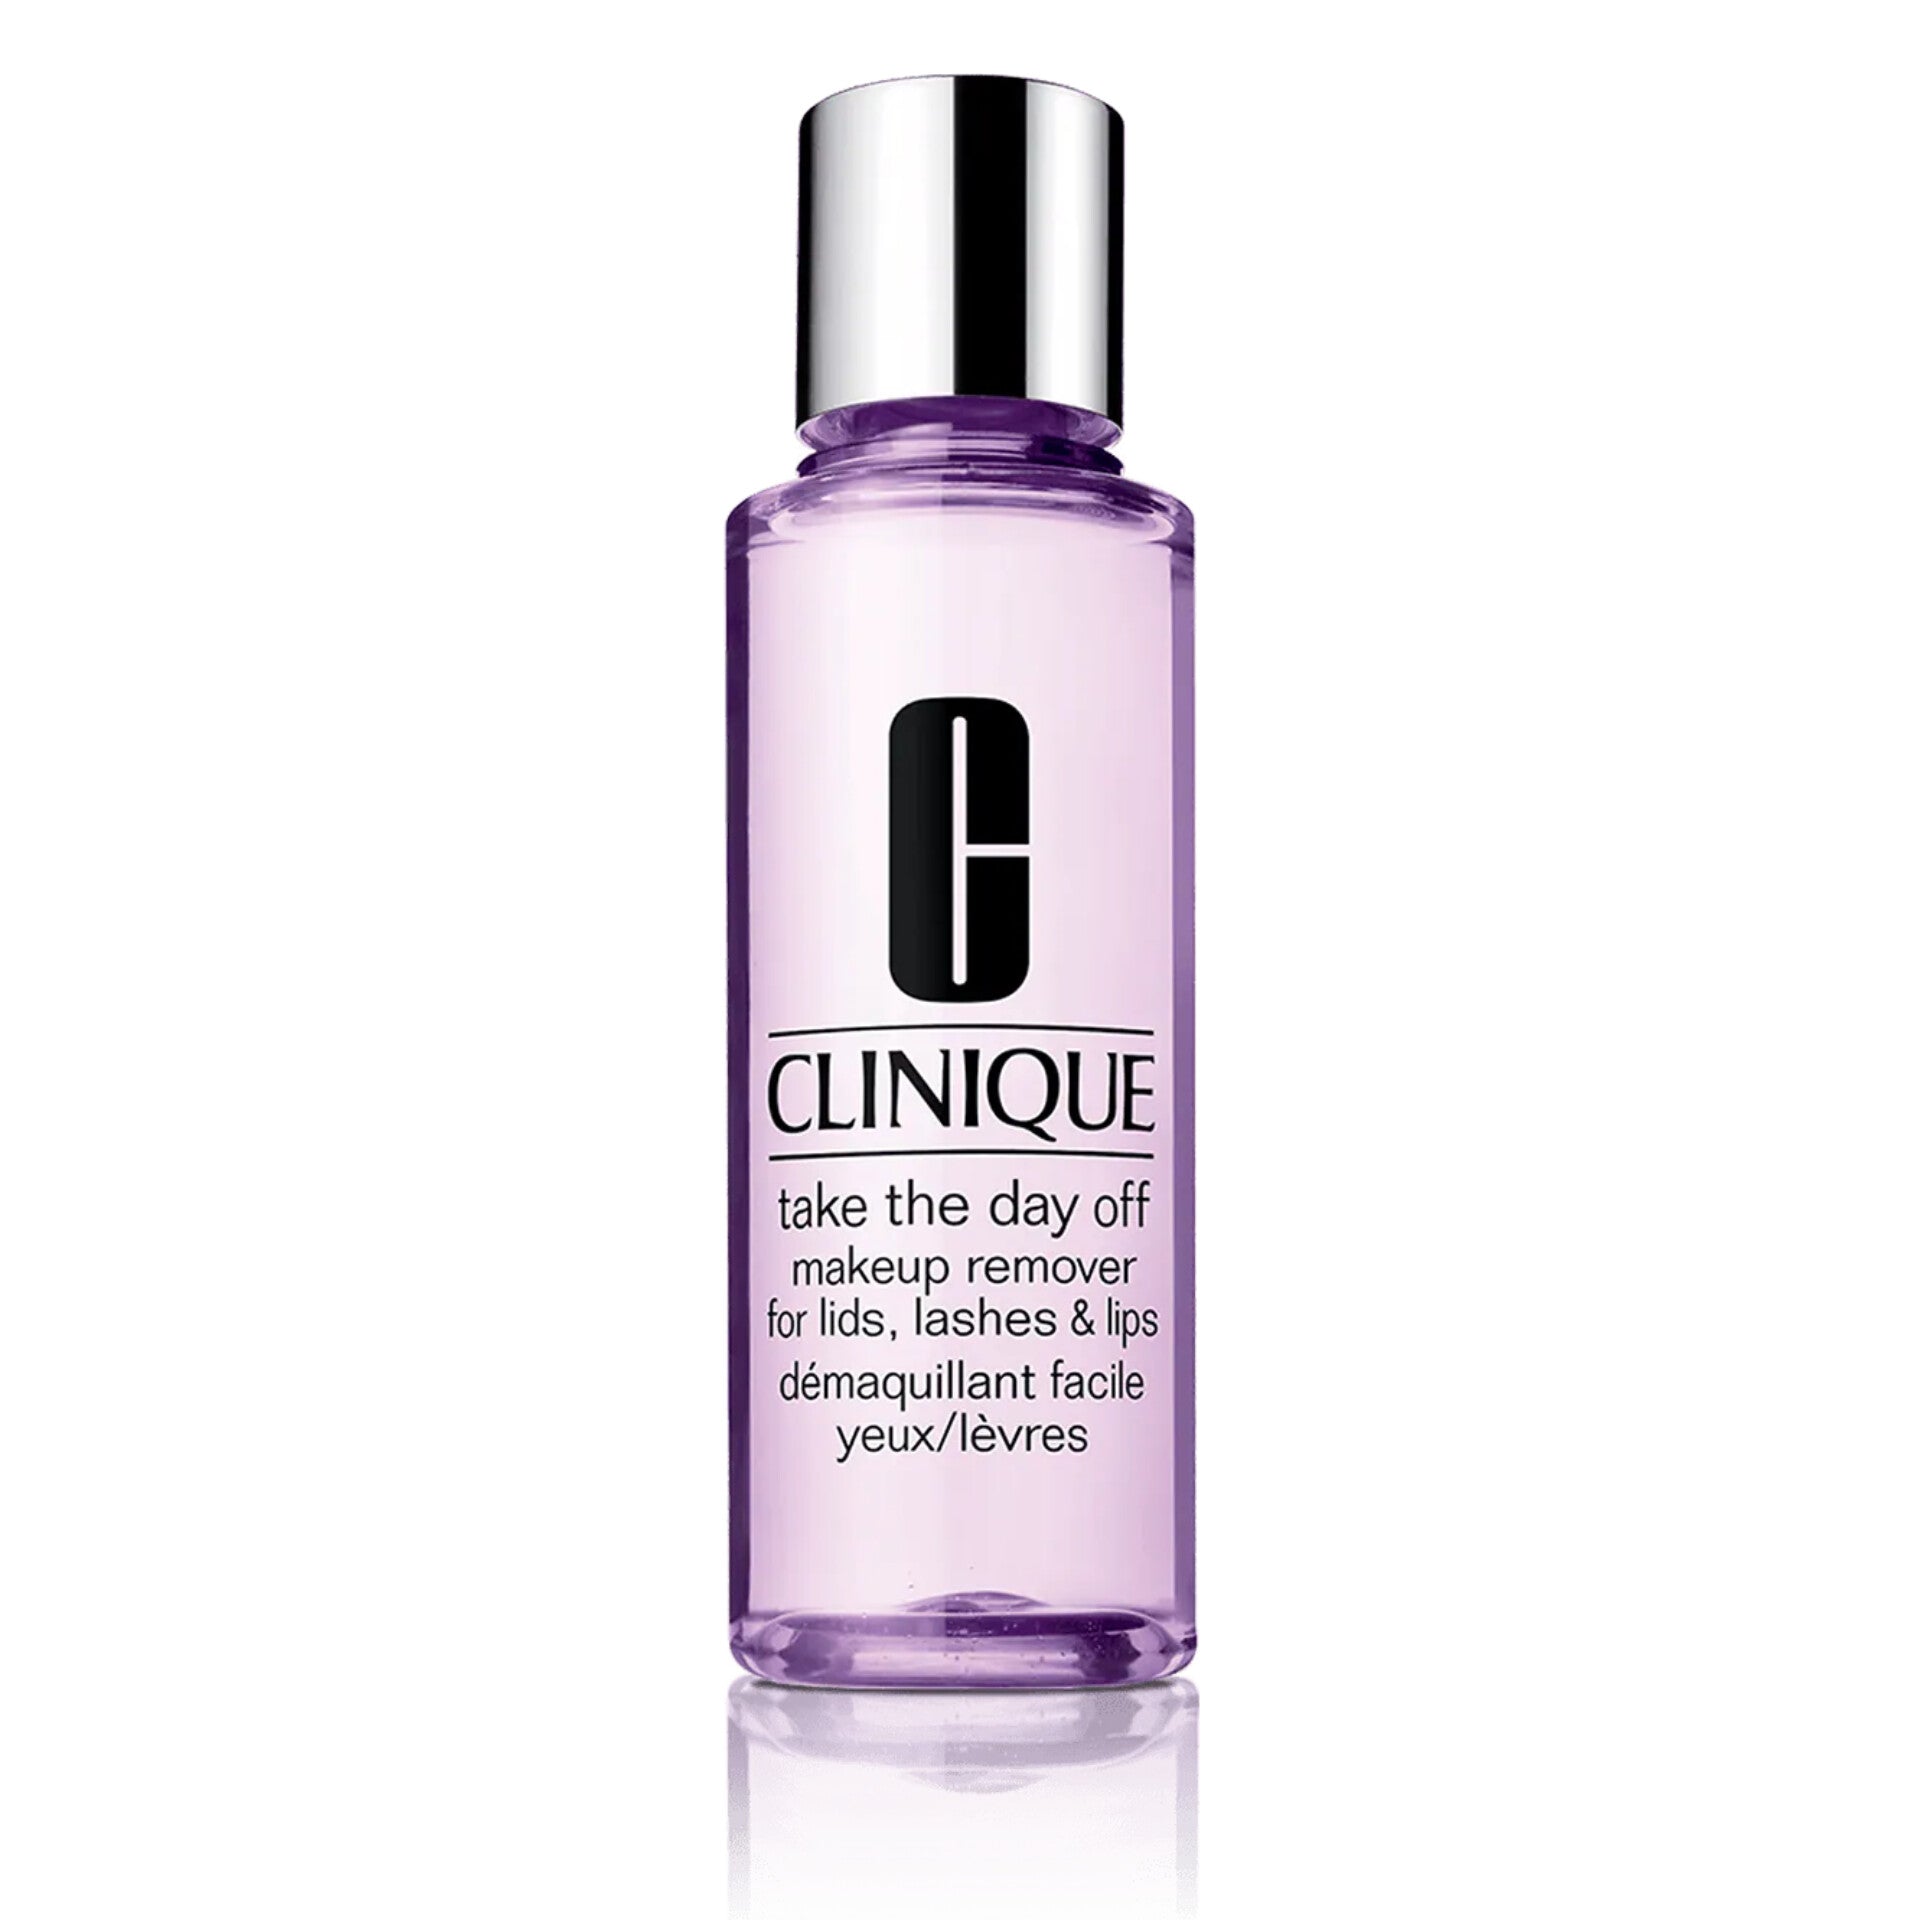 clinique-take-the-day-off-makeup-remover